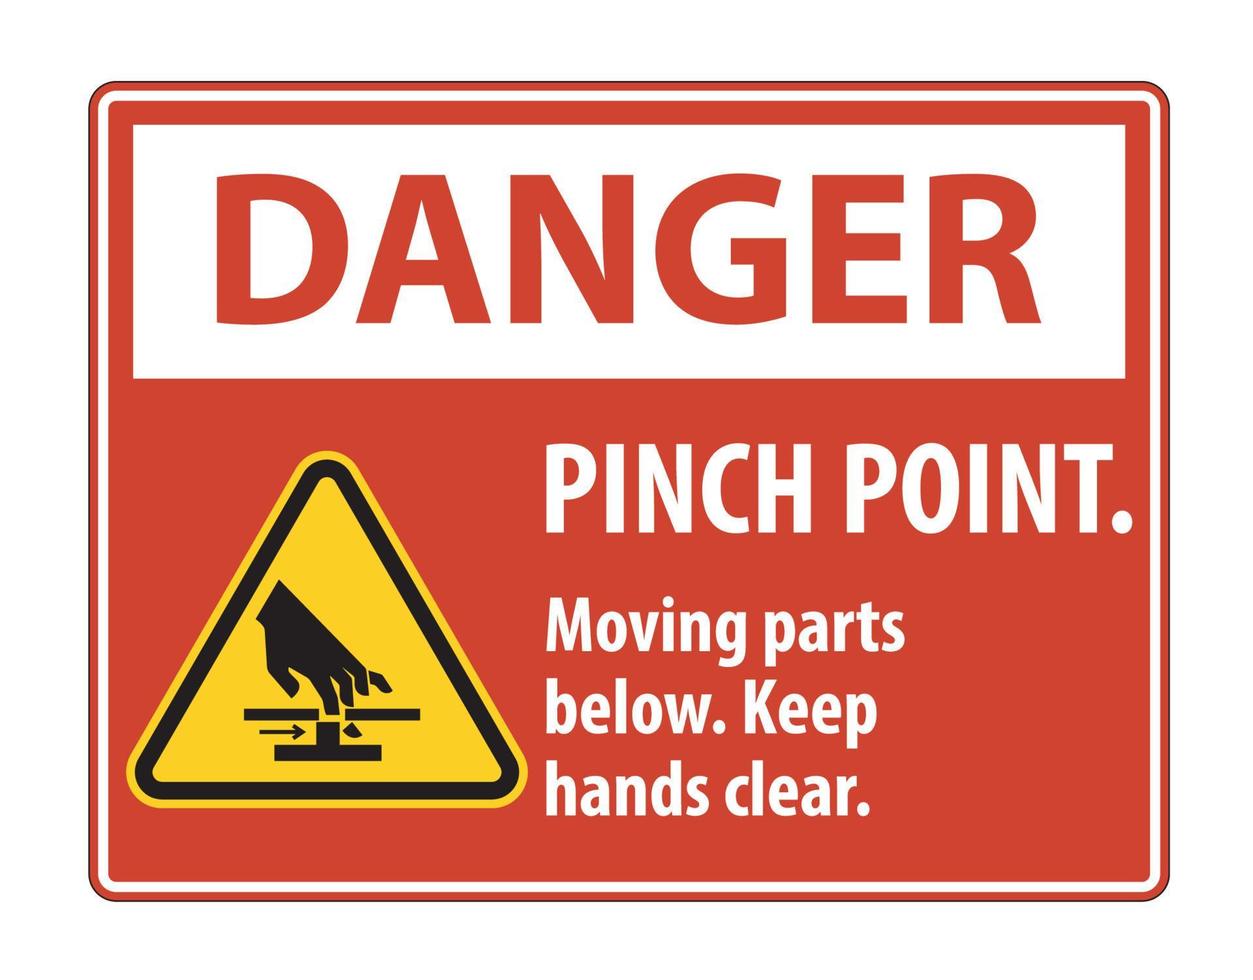 Danger Pinch Point, Moving Parts Below, Keep Hands Clear Symbol Sign Isolate on White Background,Vector Illustration EPS.10 vector